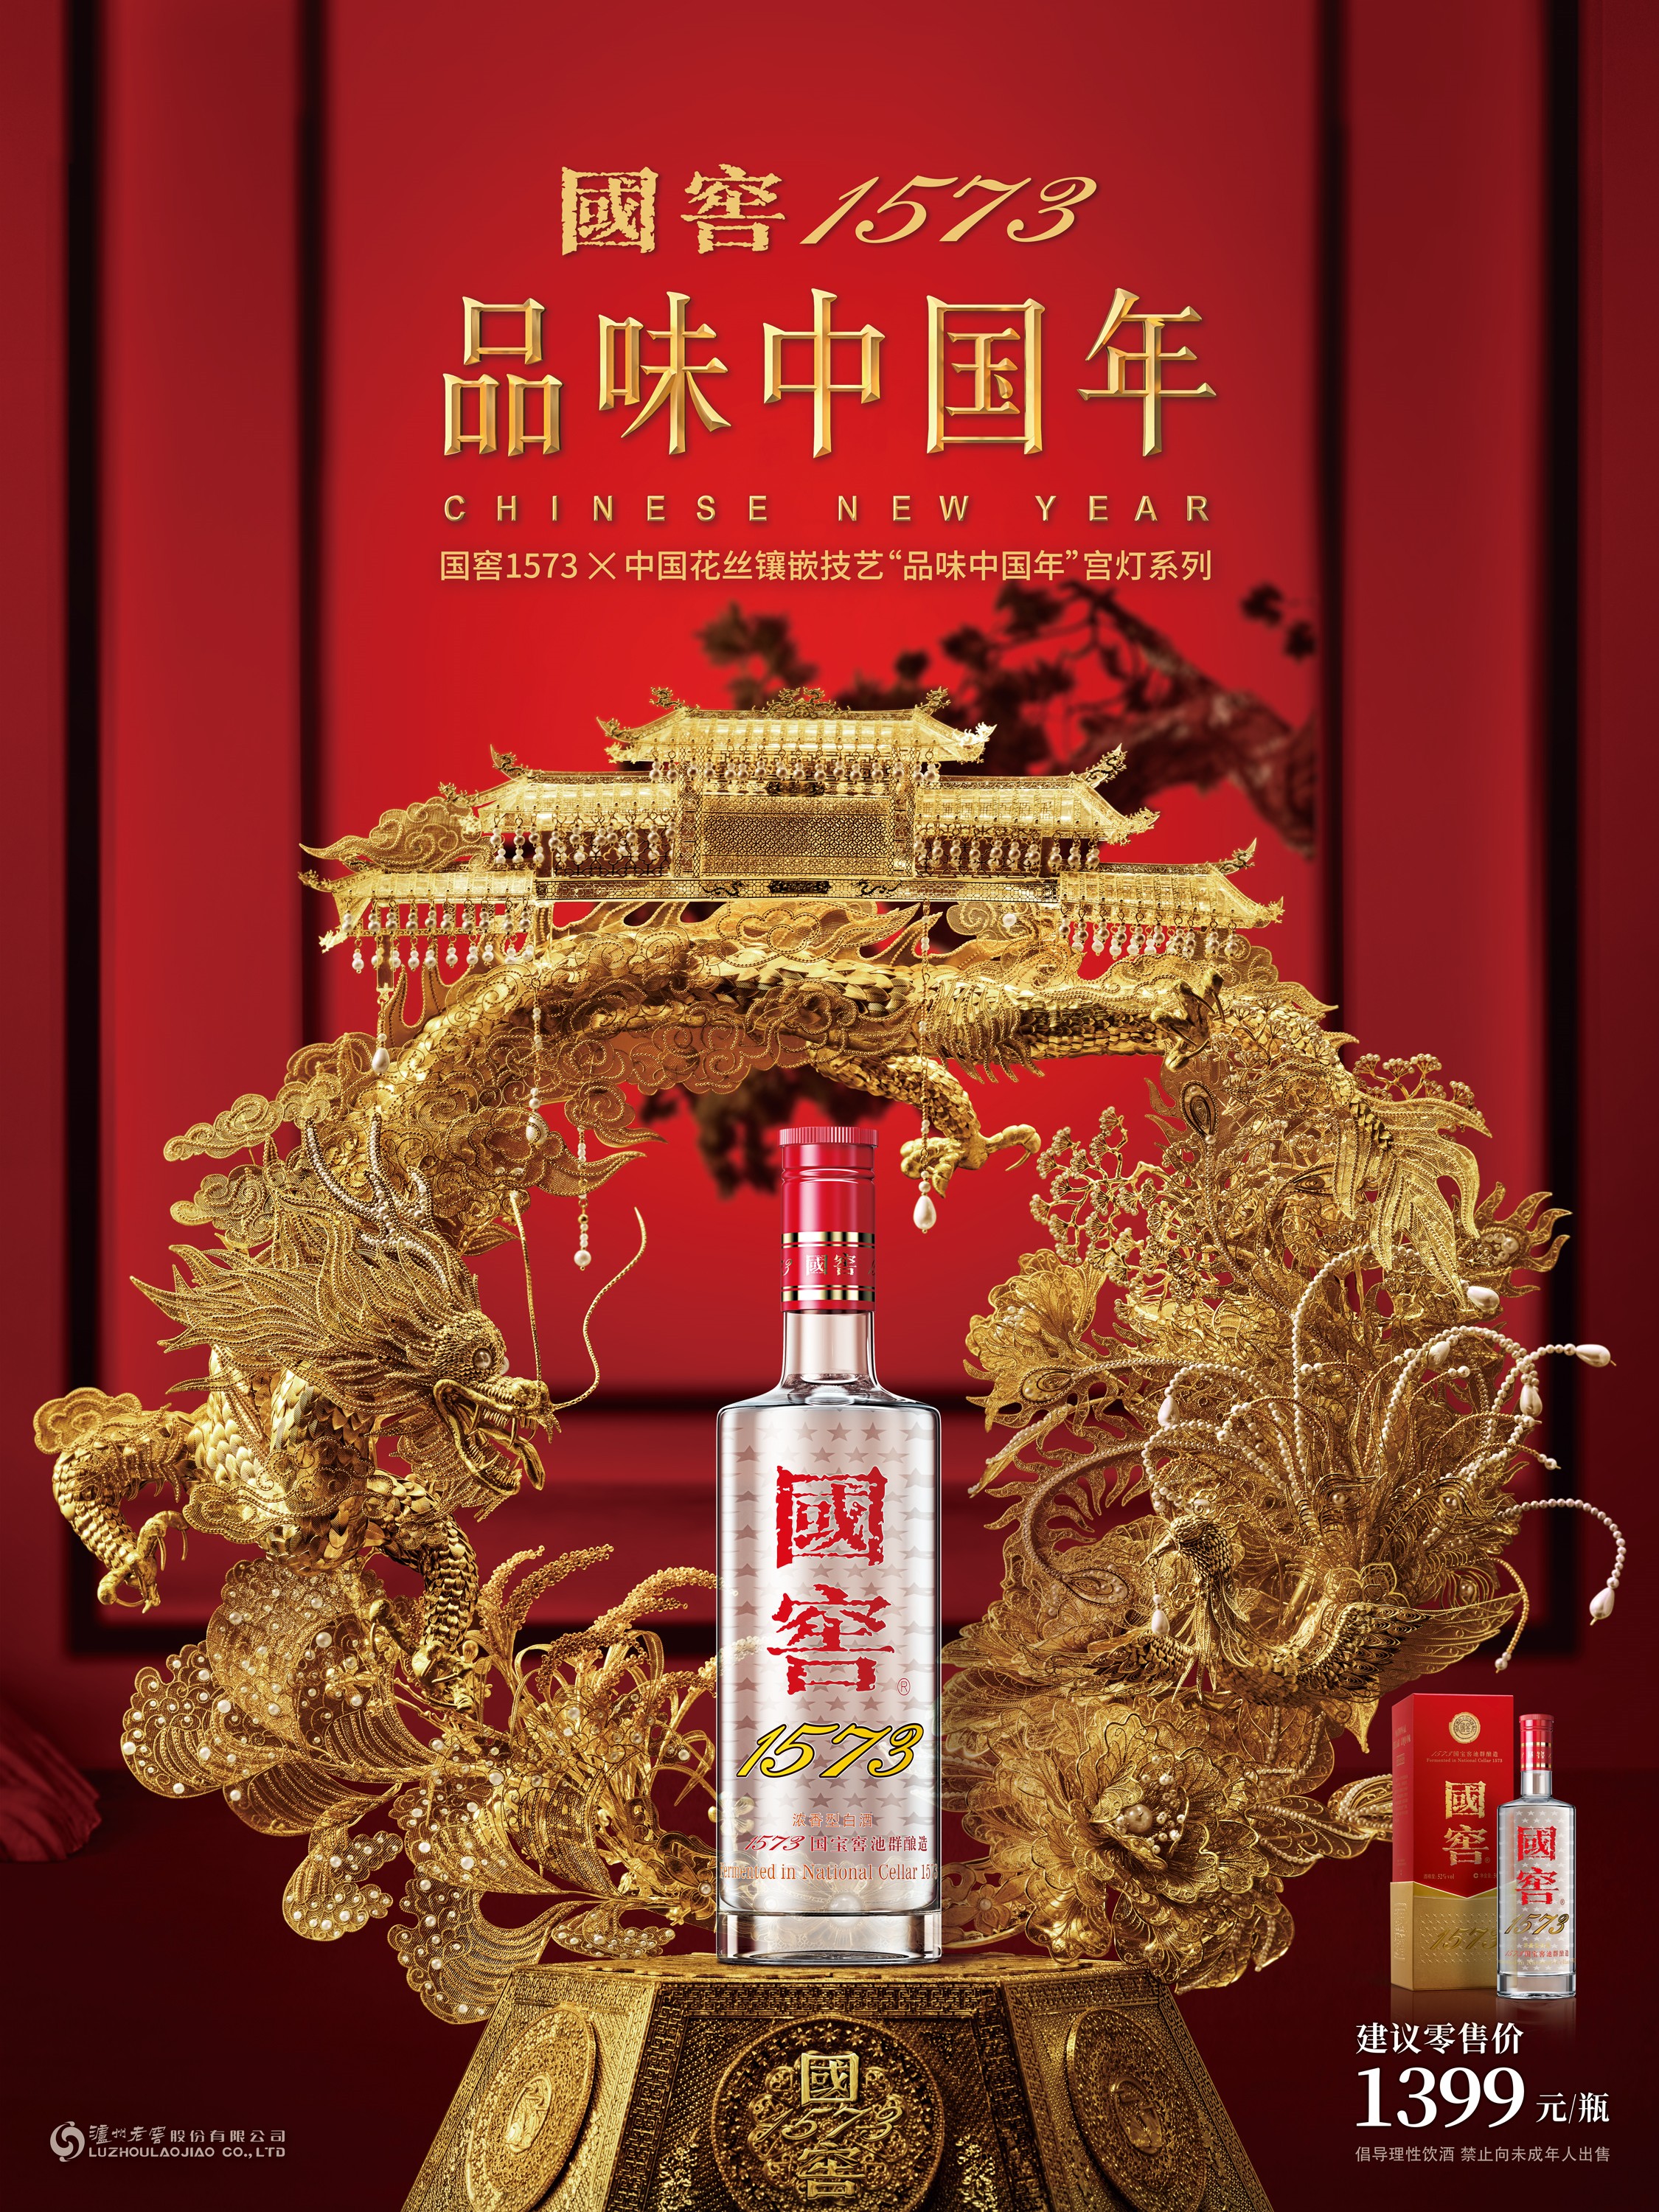 London Design Awards Winner - Guo Jiao 1573 & Intangible Cultural Heritage Poster Series